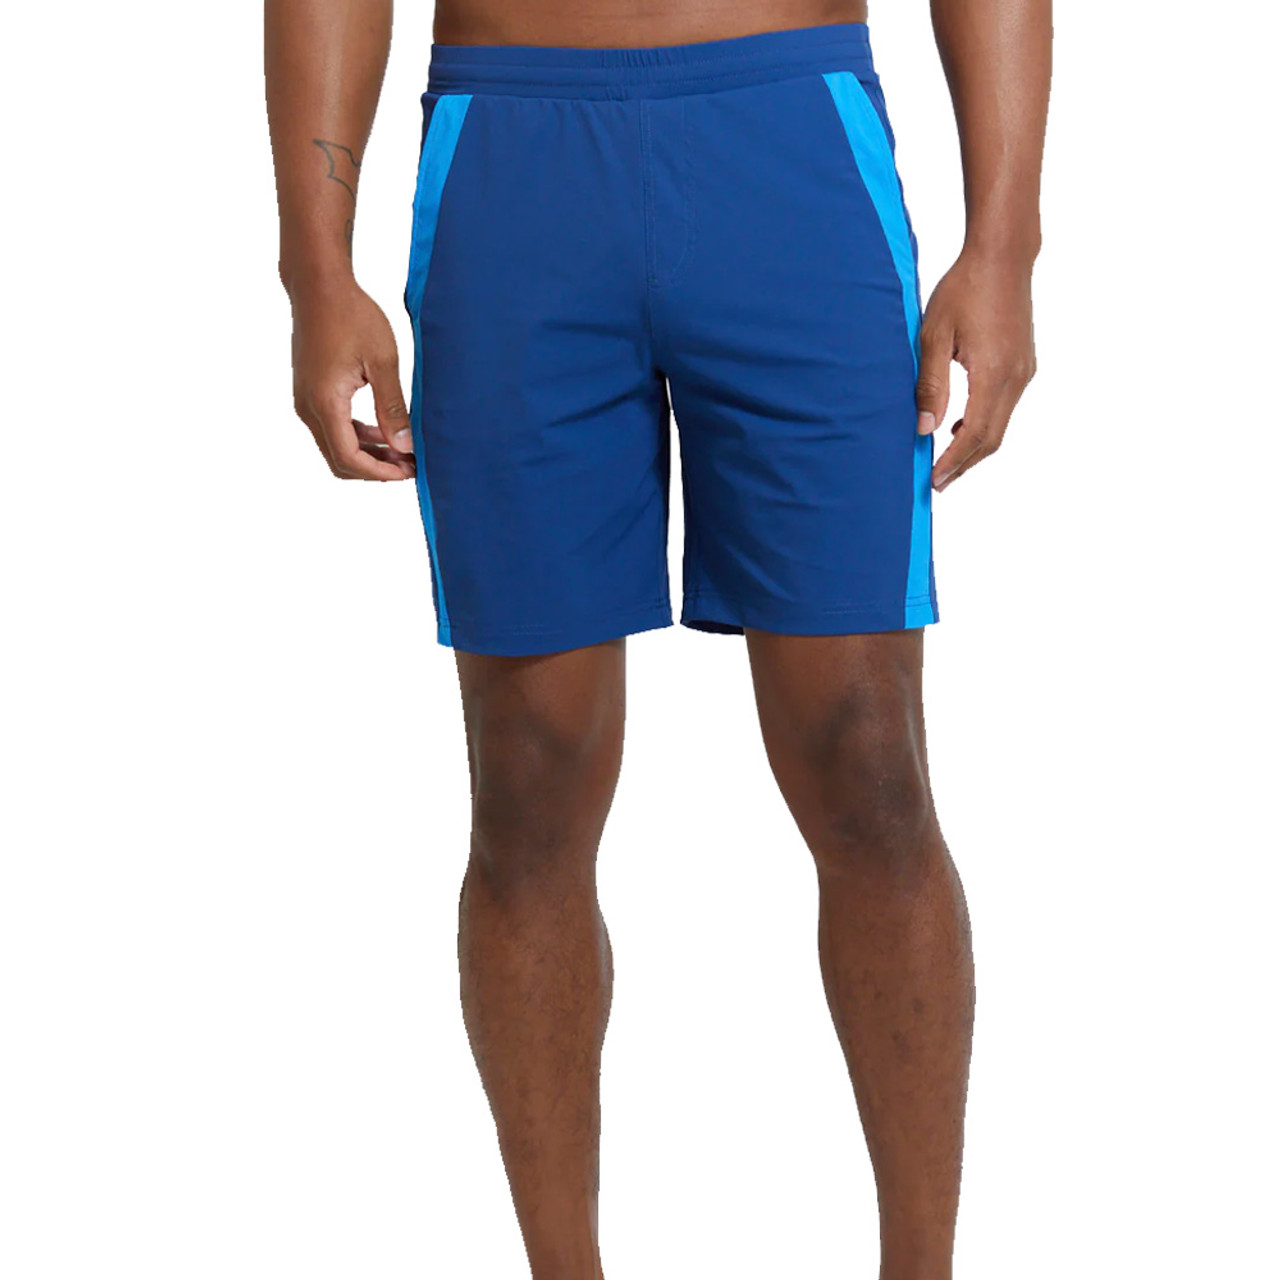 Redvanly Parnell Men's Shorts | Fast, Free Shipping!